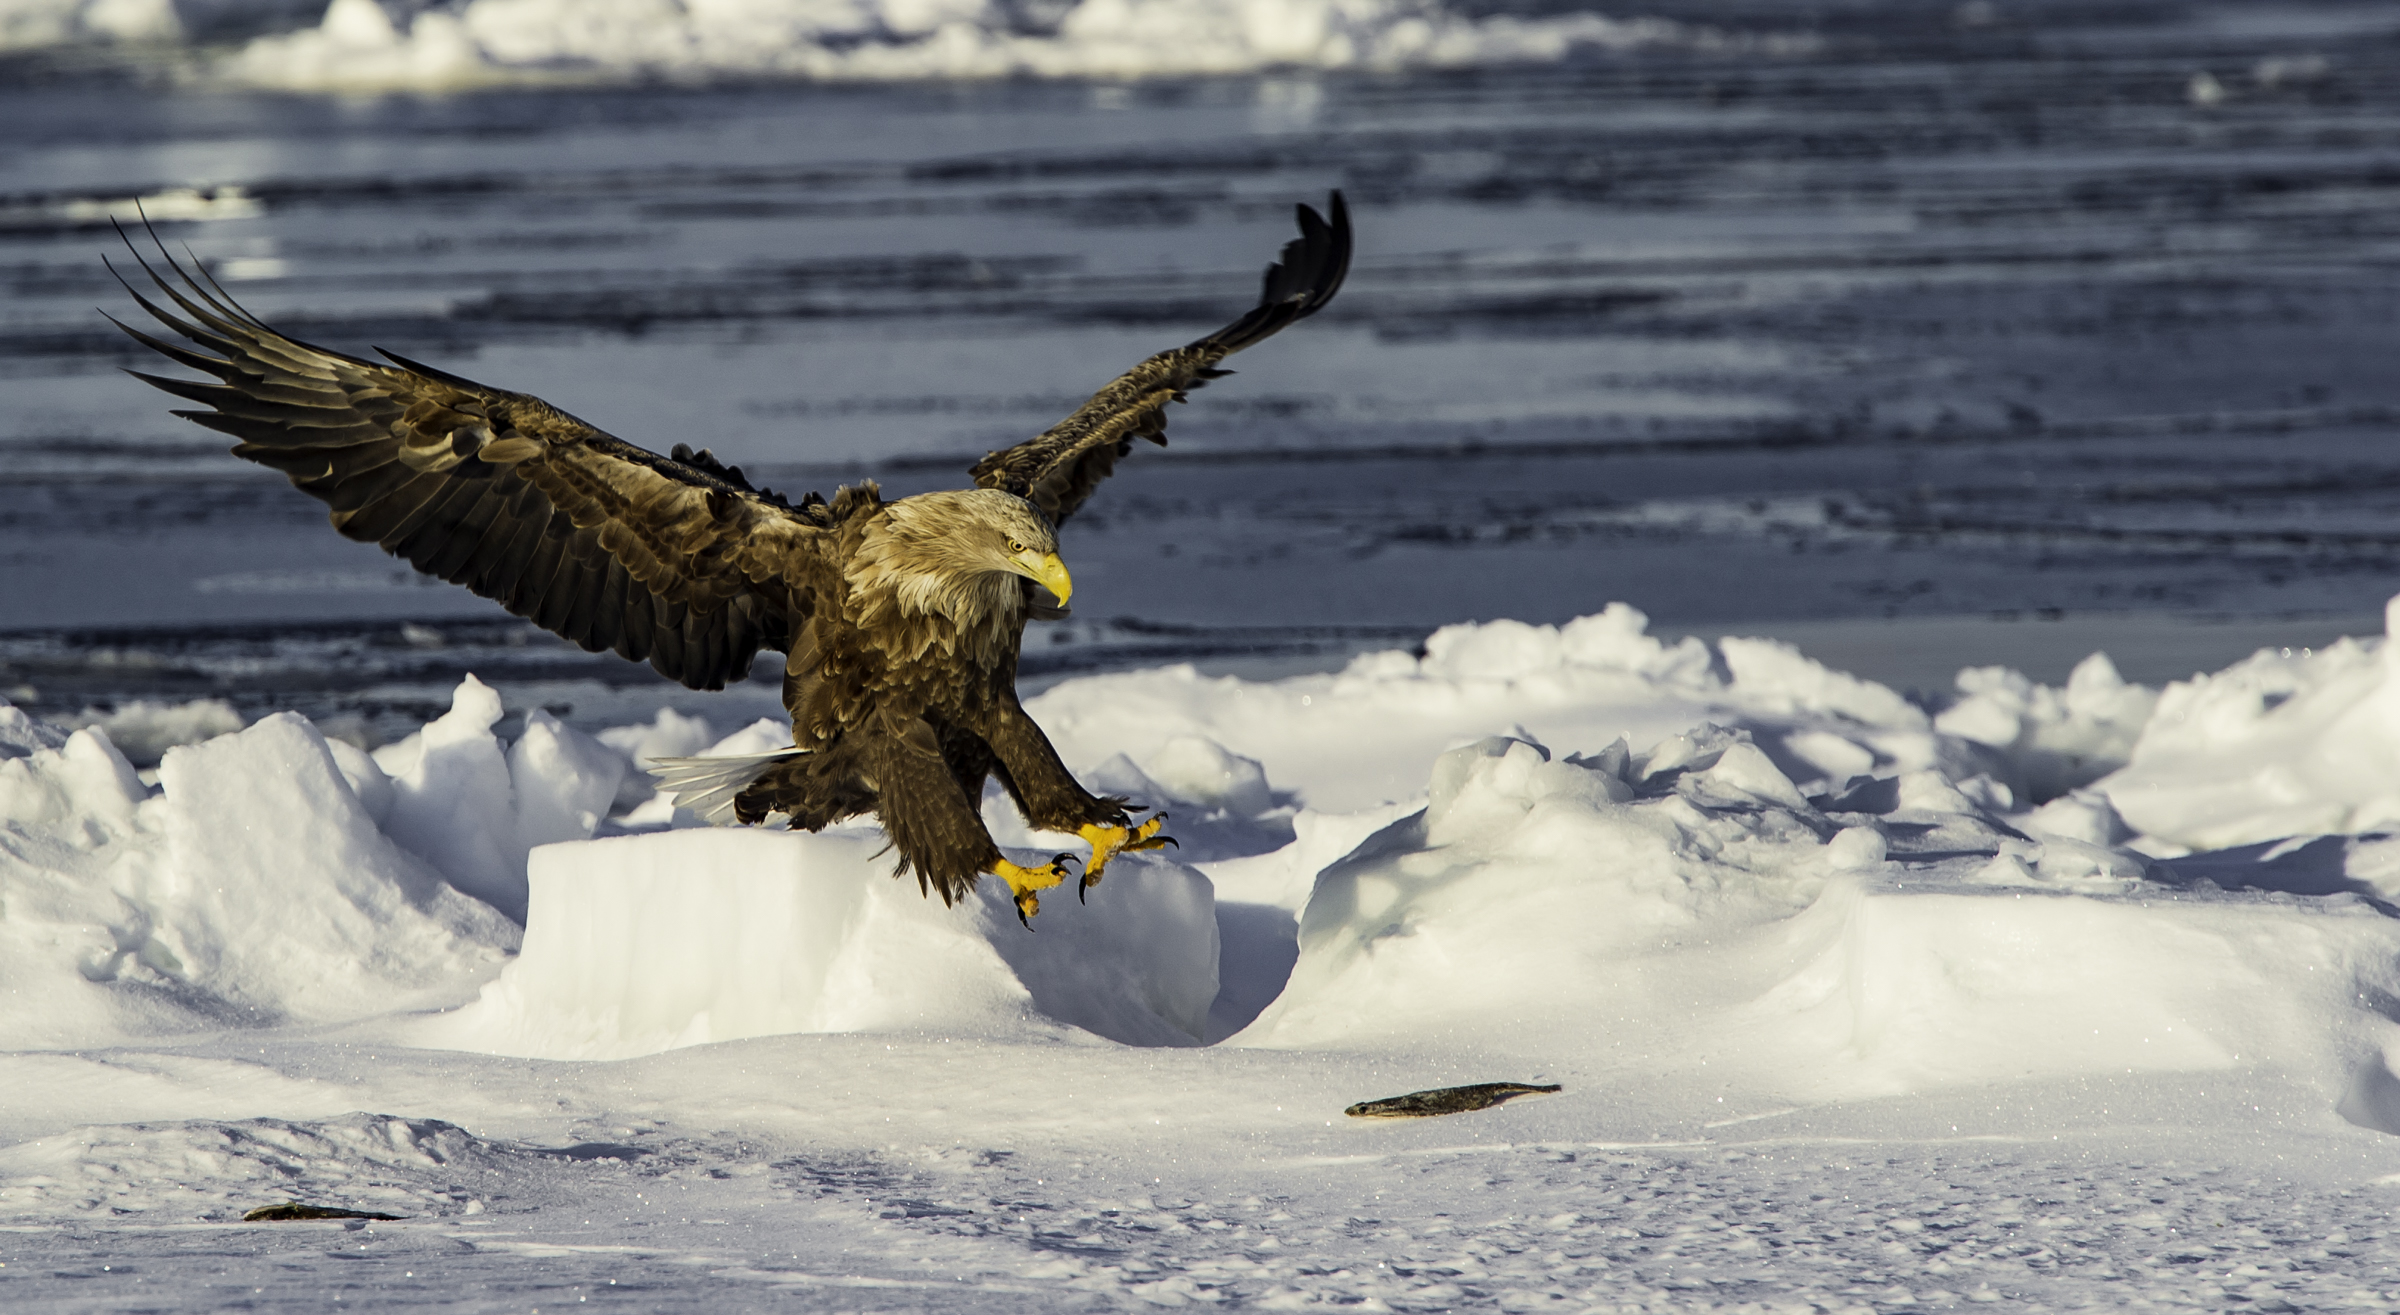 General 2400x1315 nature landscape water sea birds eagle snow ice winter flying